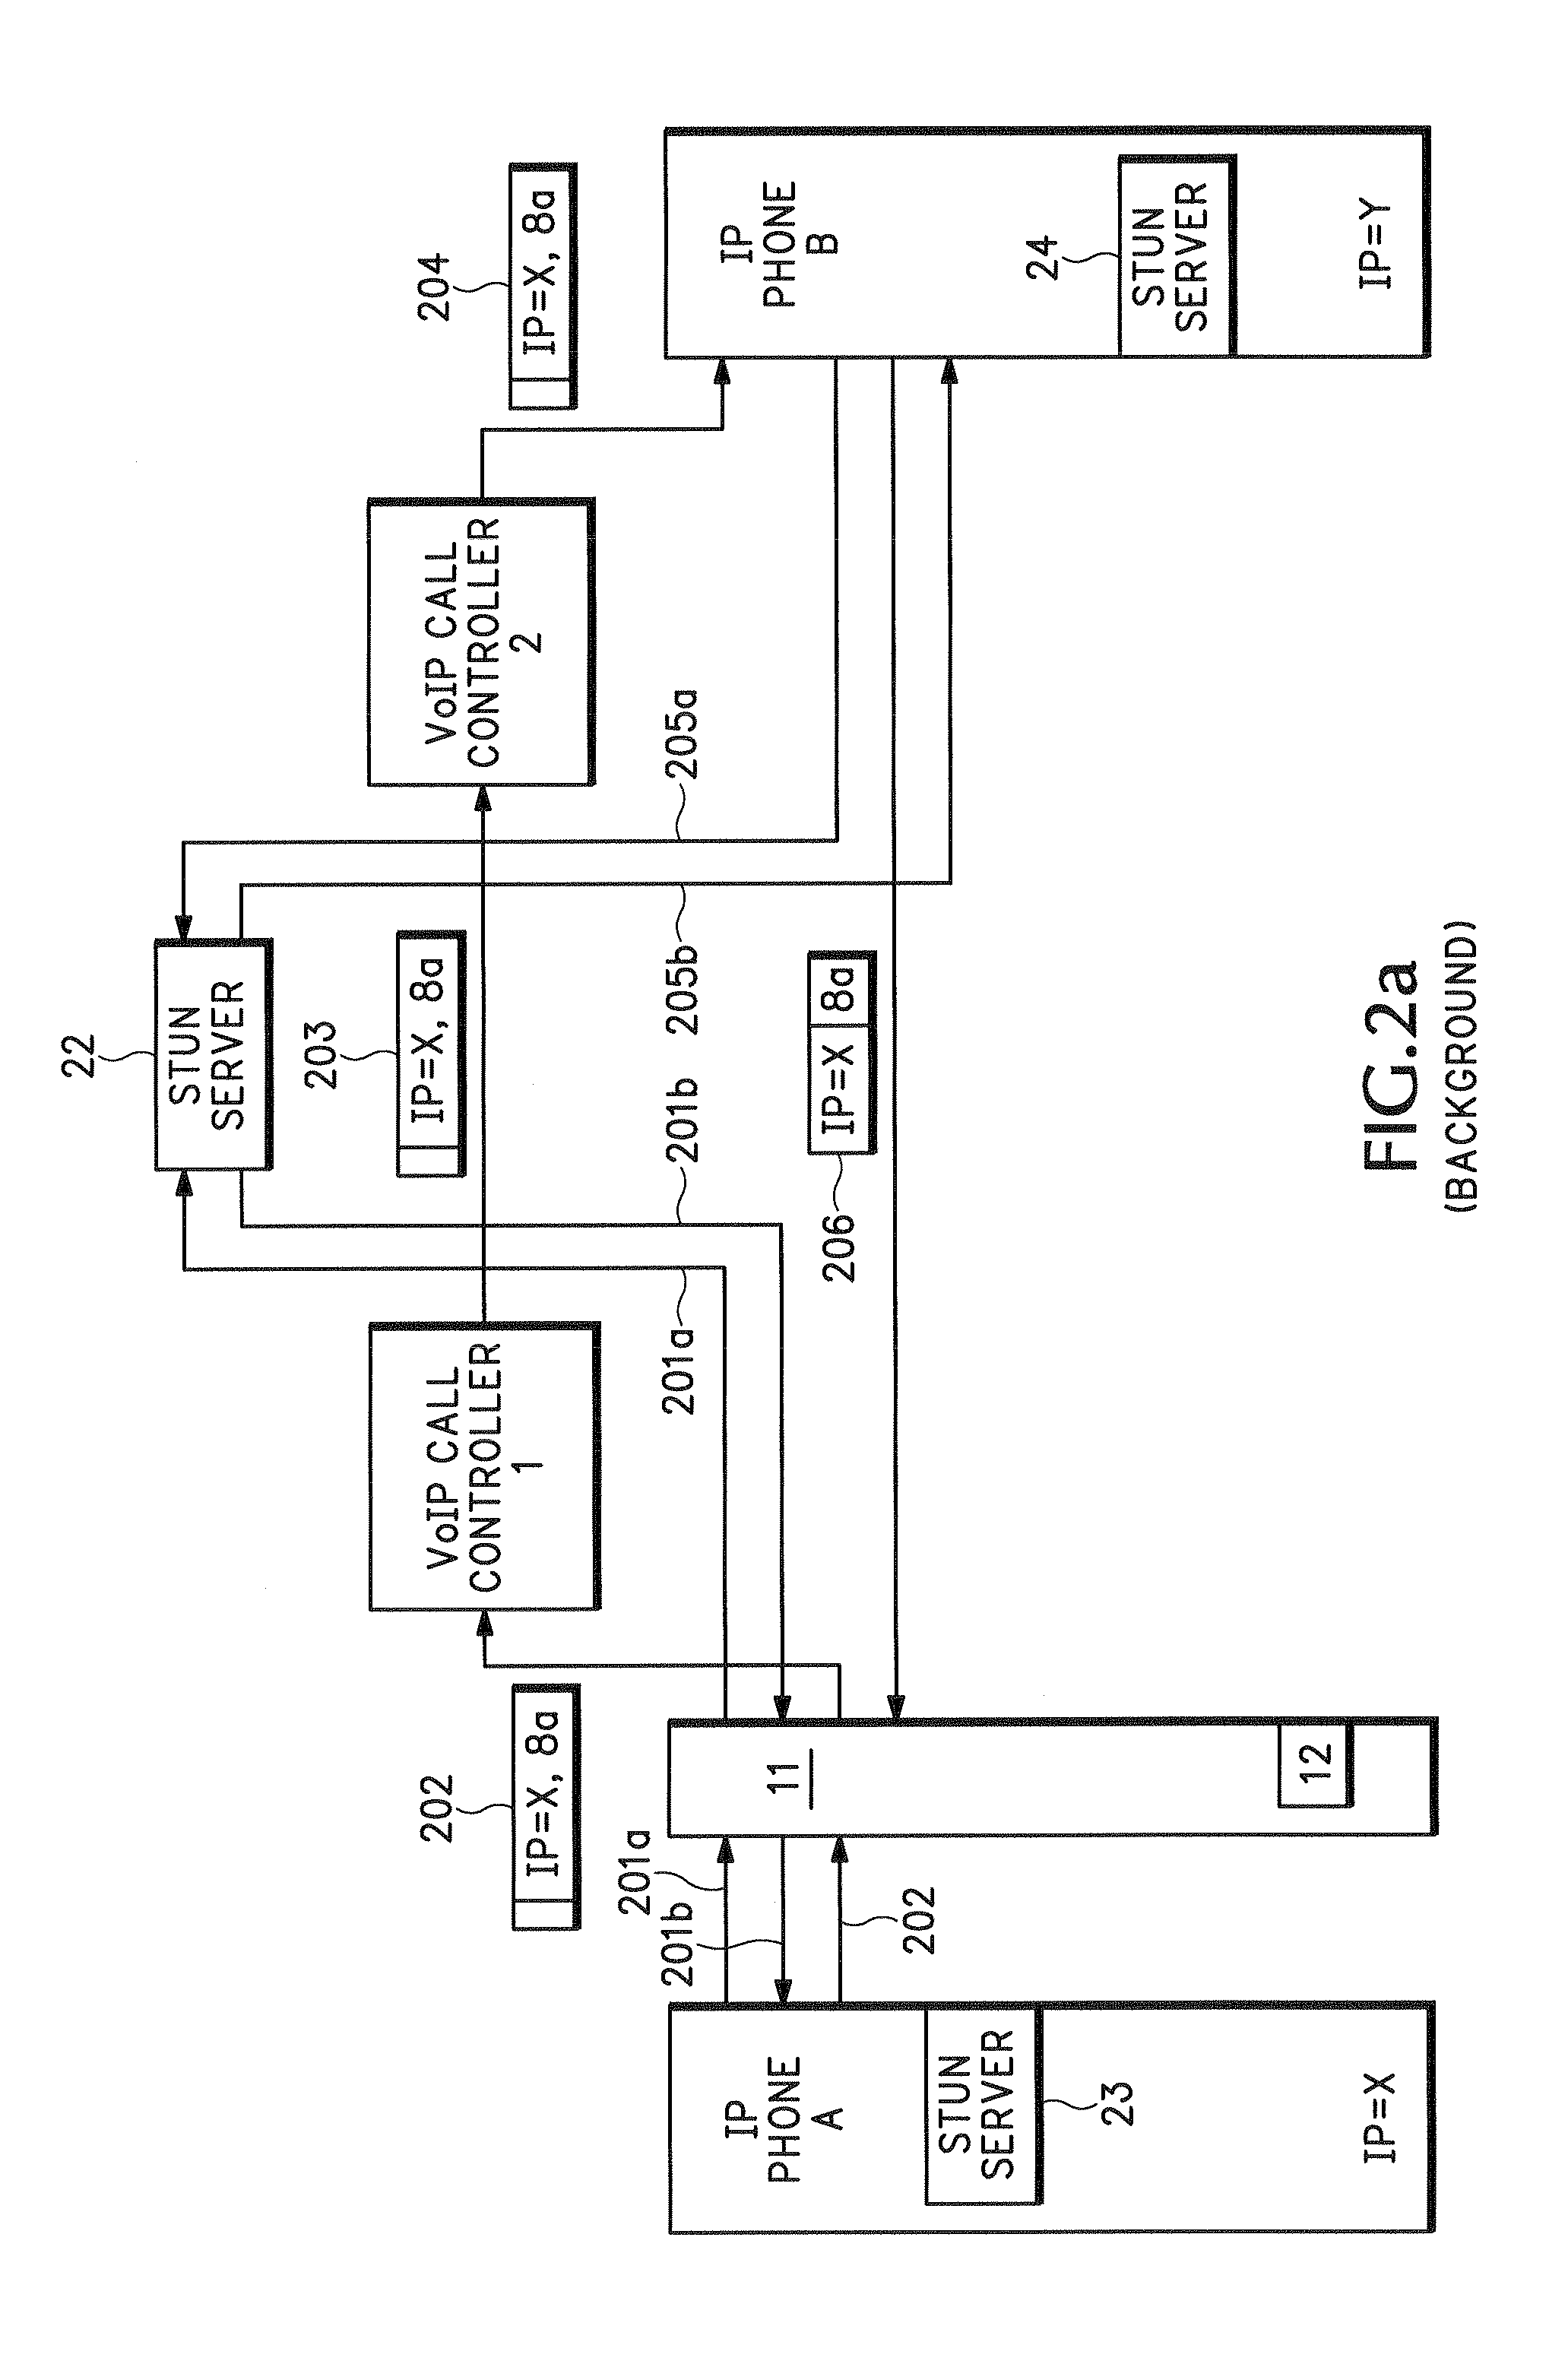 Method for stateful firewall inspection of ICE messages